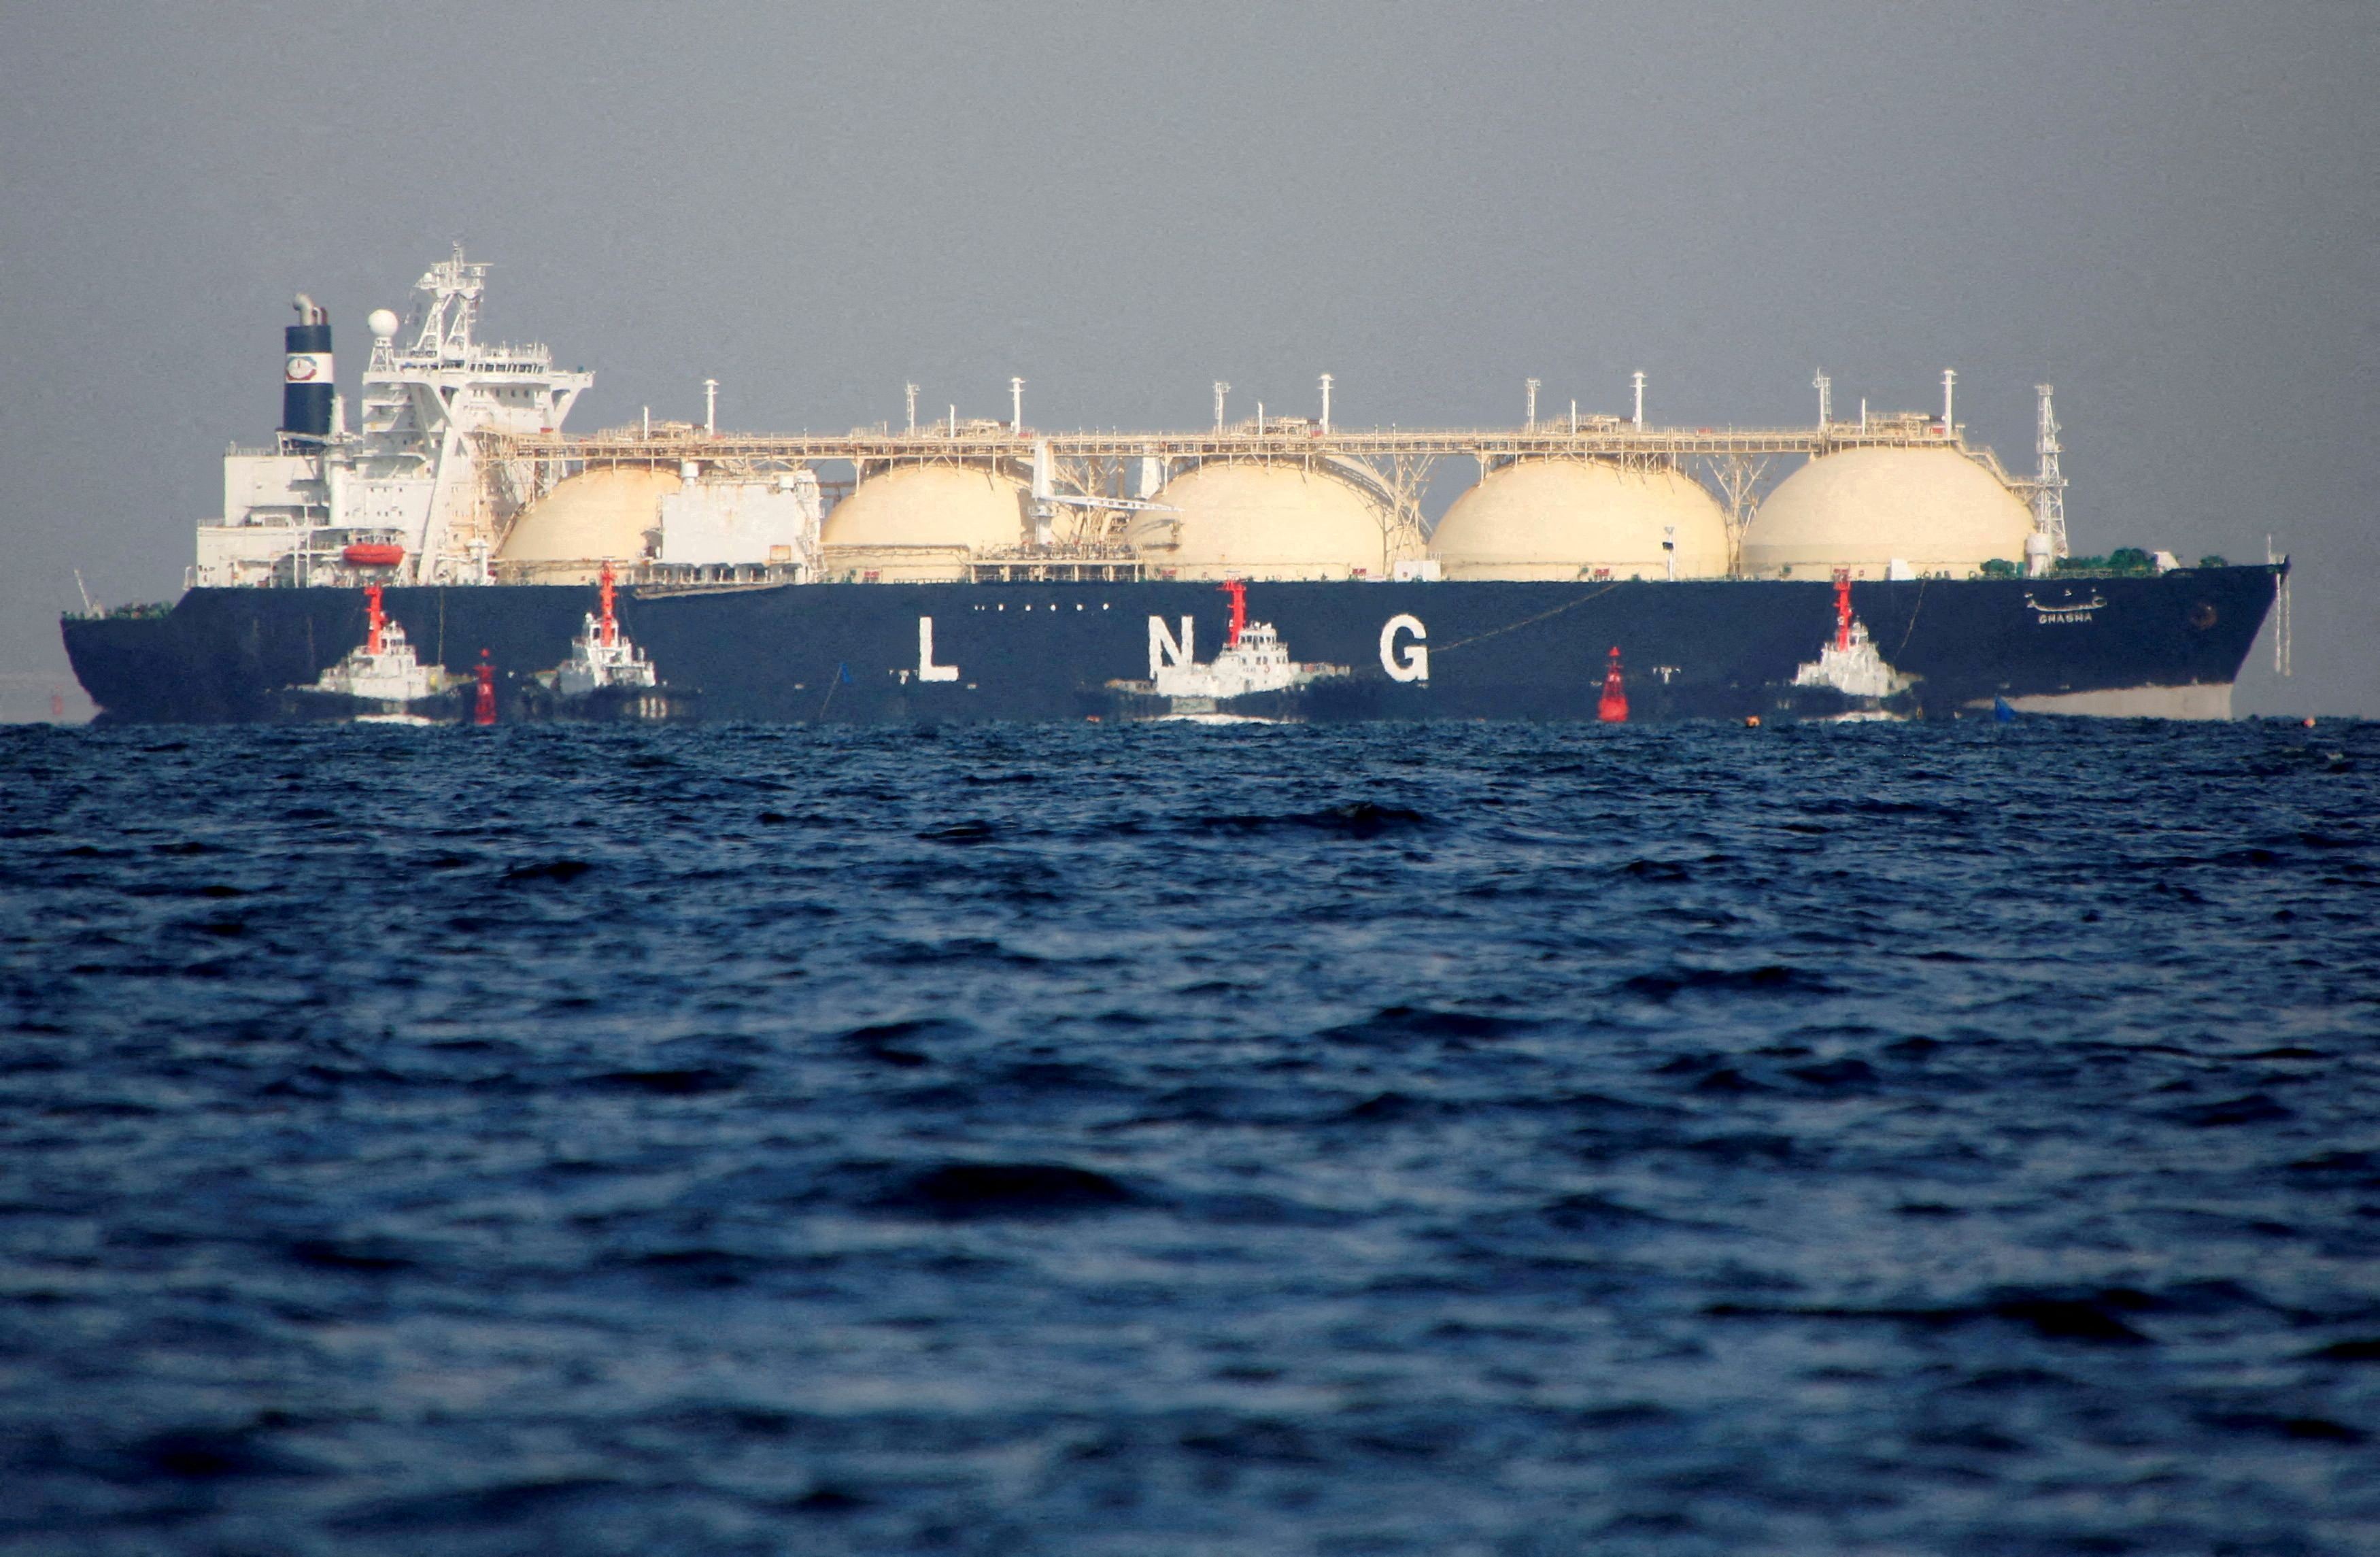 An LNG tanker is tugged towards a thermal power station in Futtsu